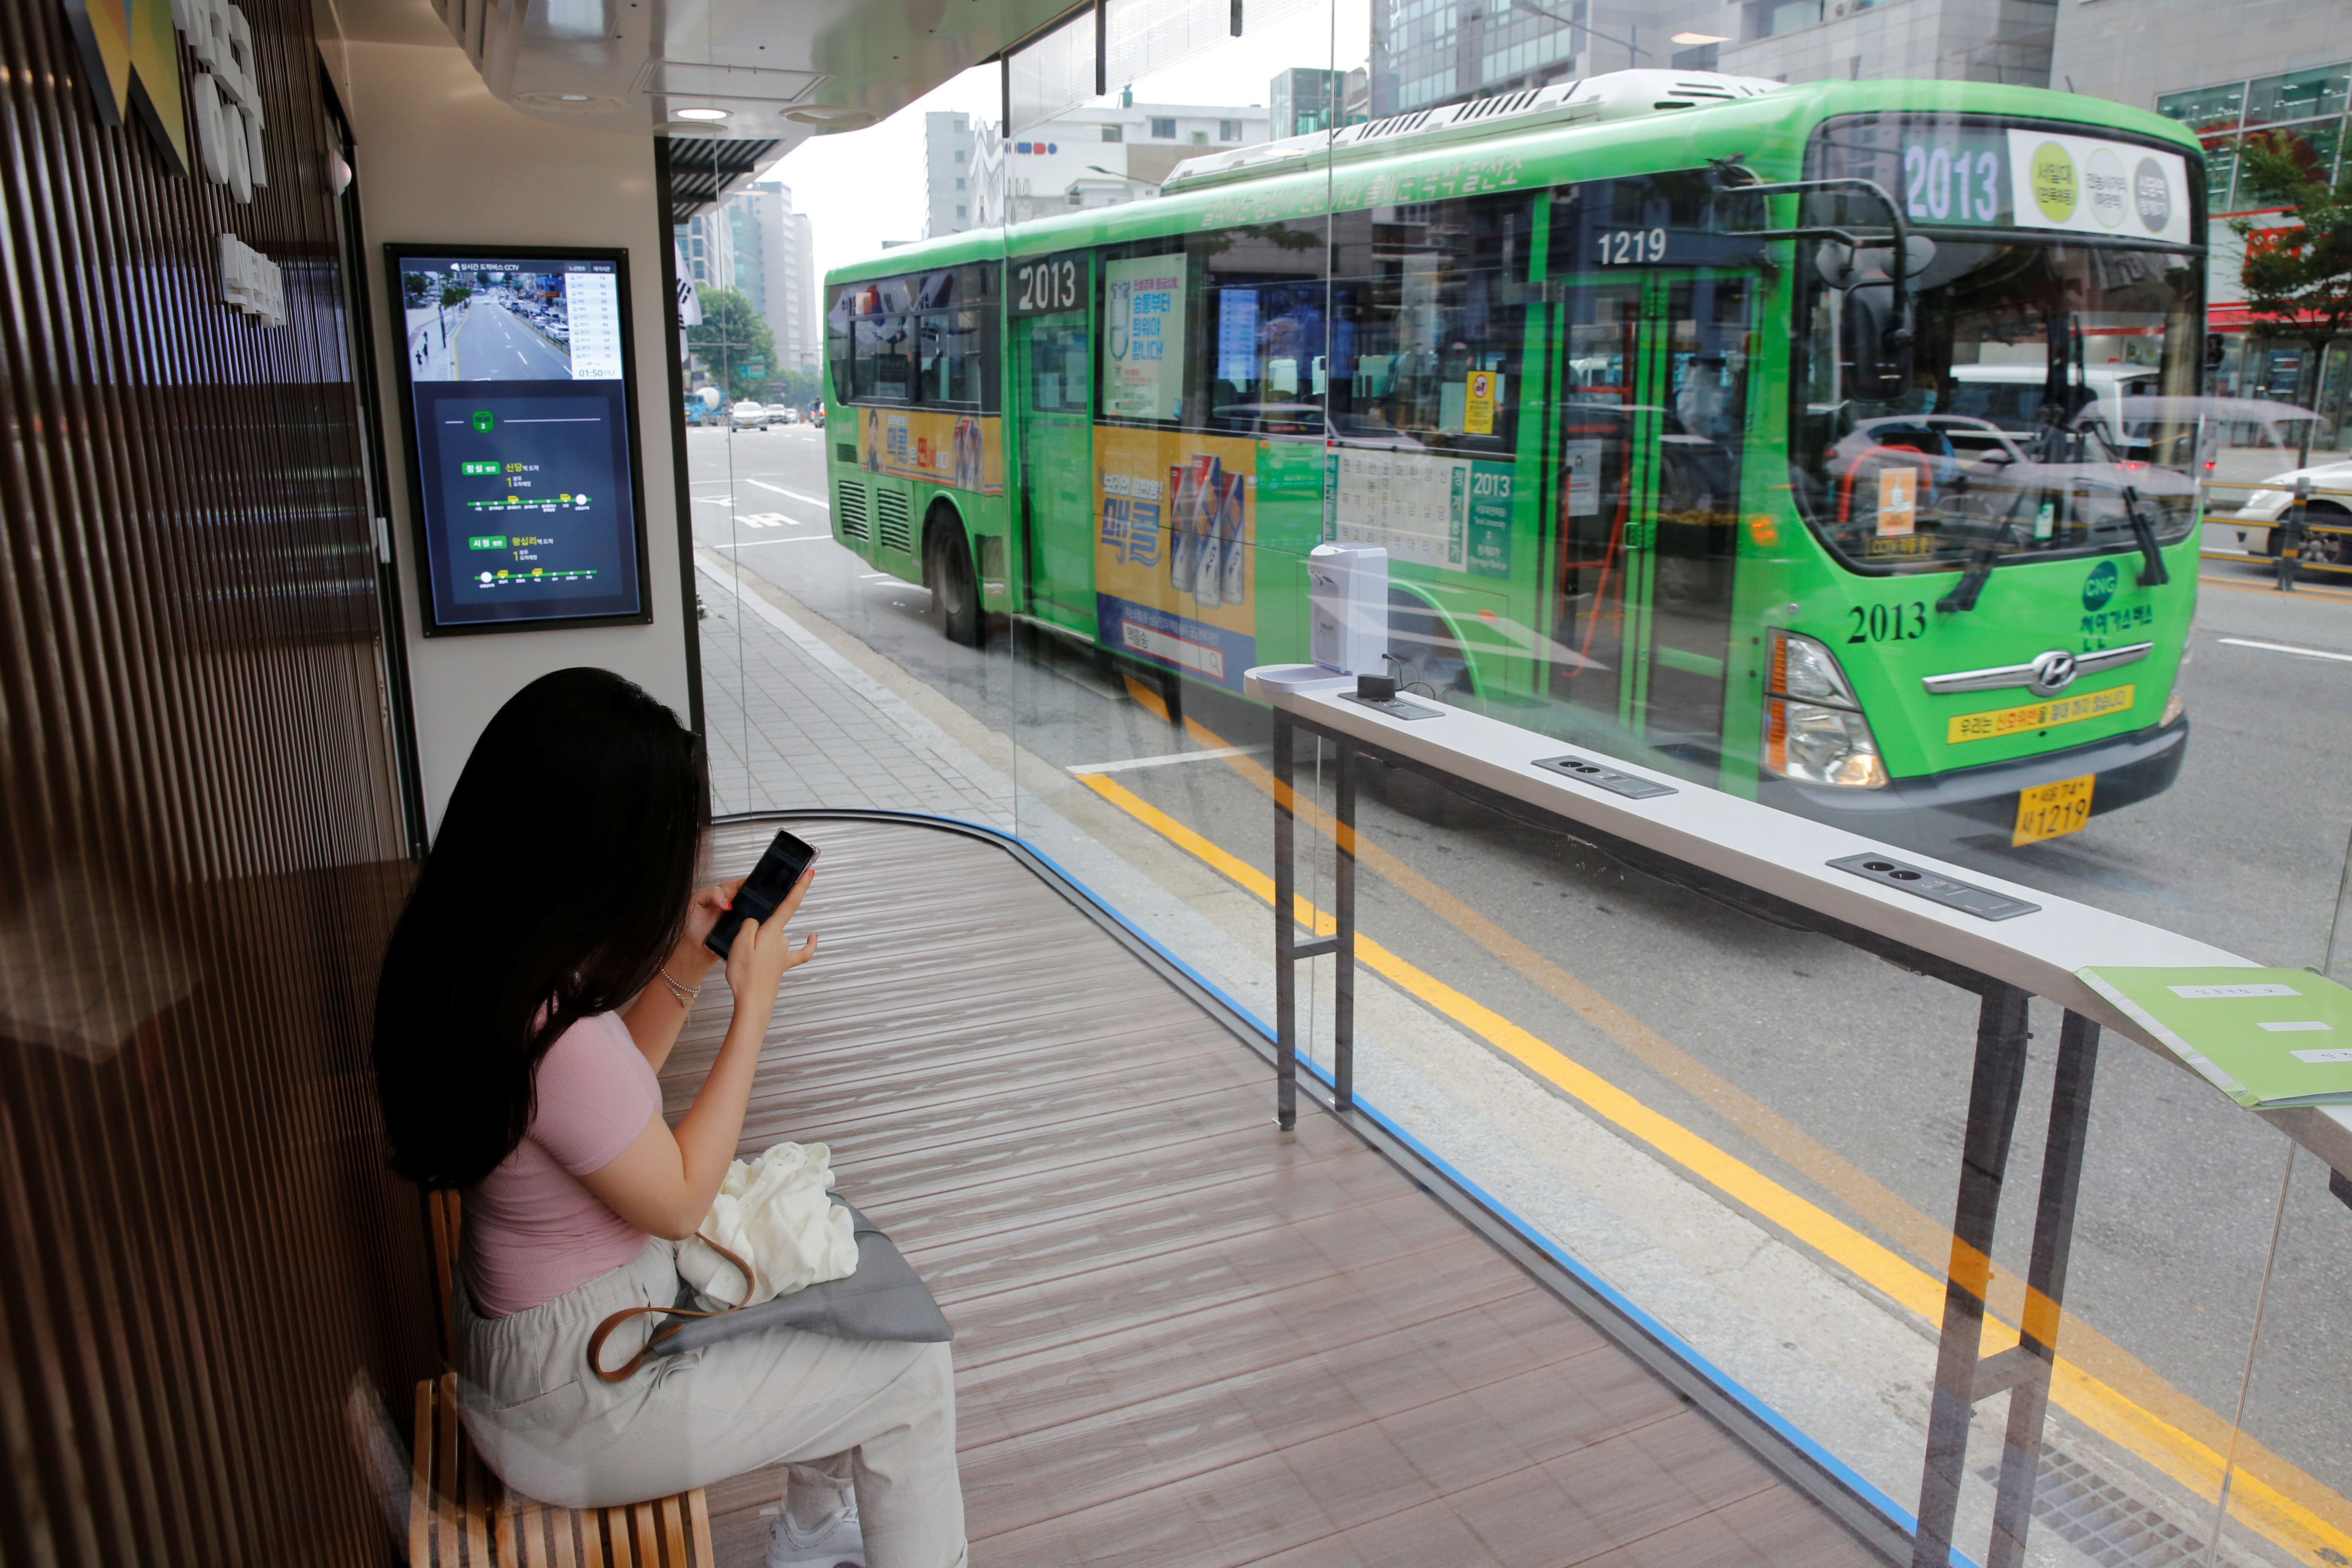 Woman waits for a bus inside a glass-covered bus stop in Seoul